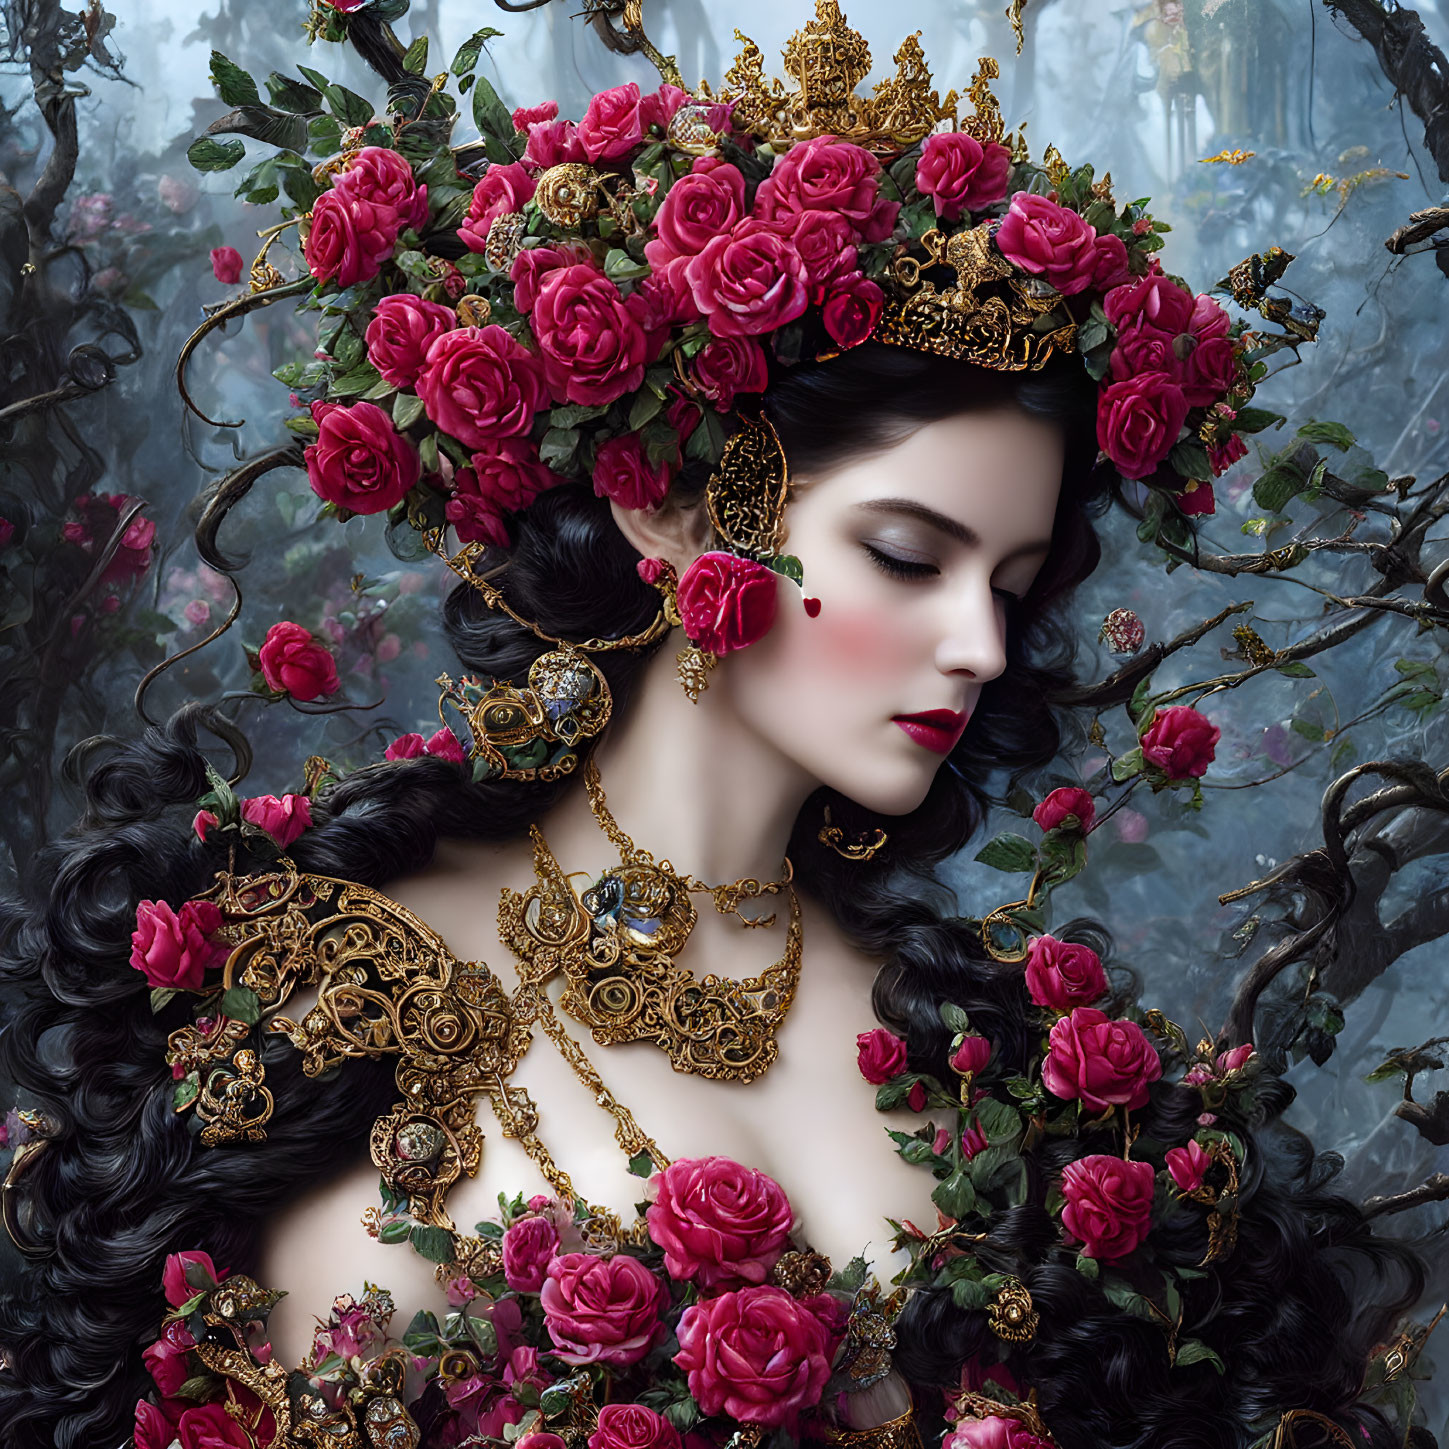 Woman with gold crown and jewelry among pink roses and dark vines symbolizes elegance and fairy tale mystique